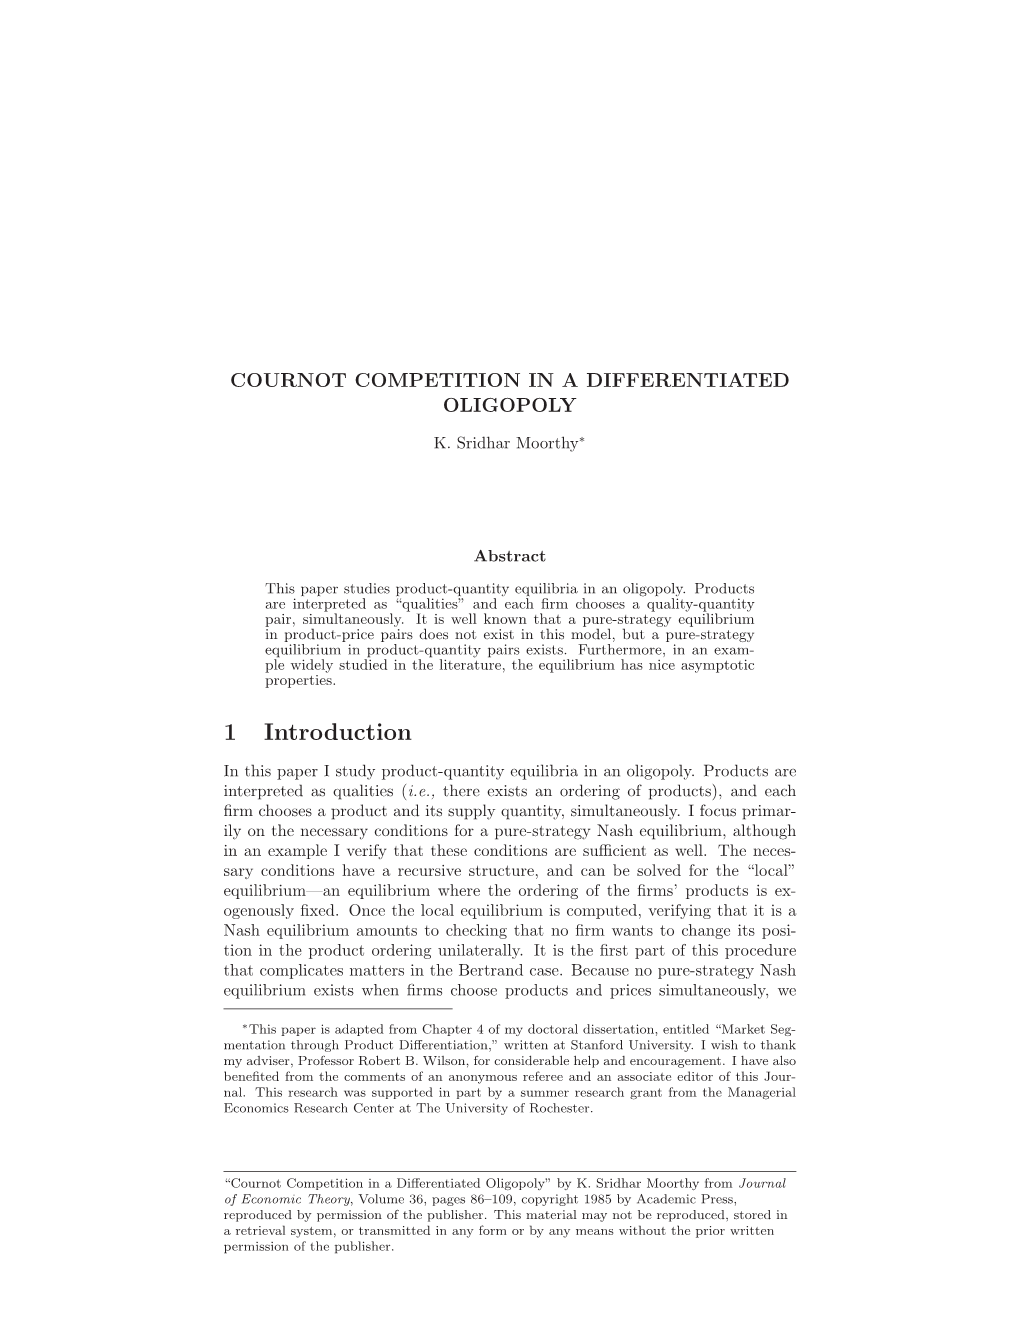 Cournot Competition in a Differentiated Oligopoly